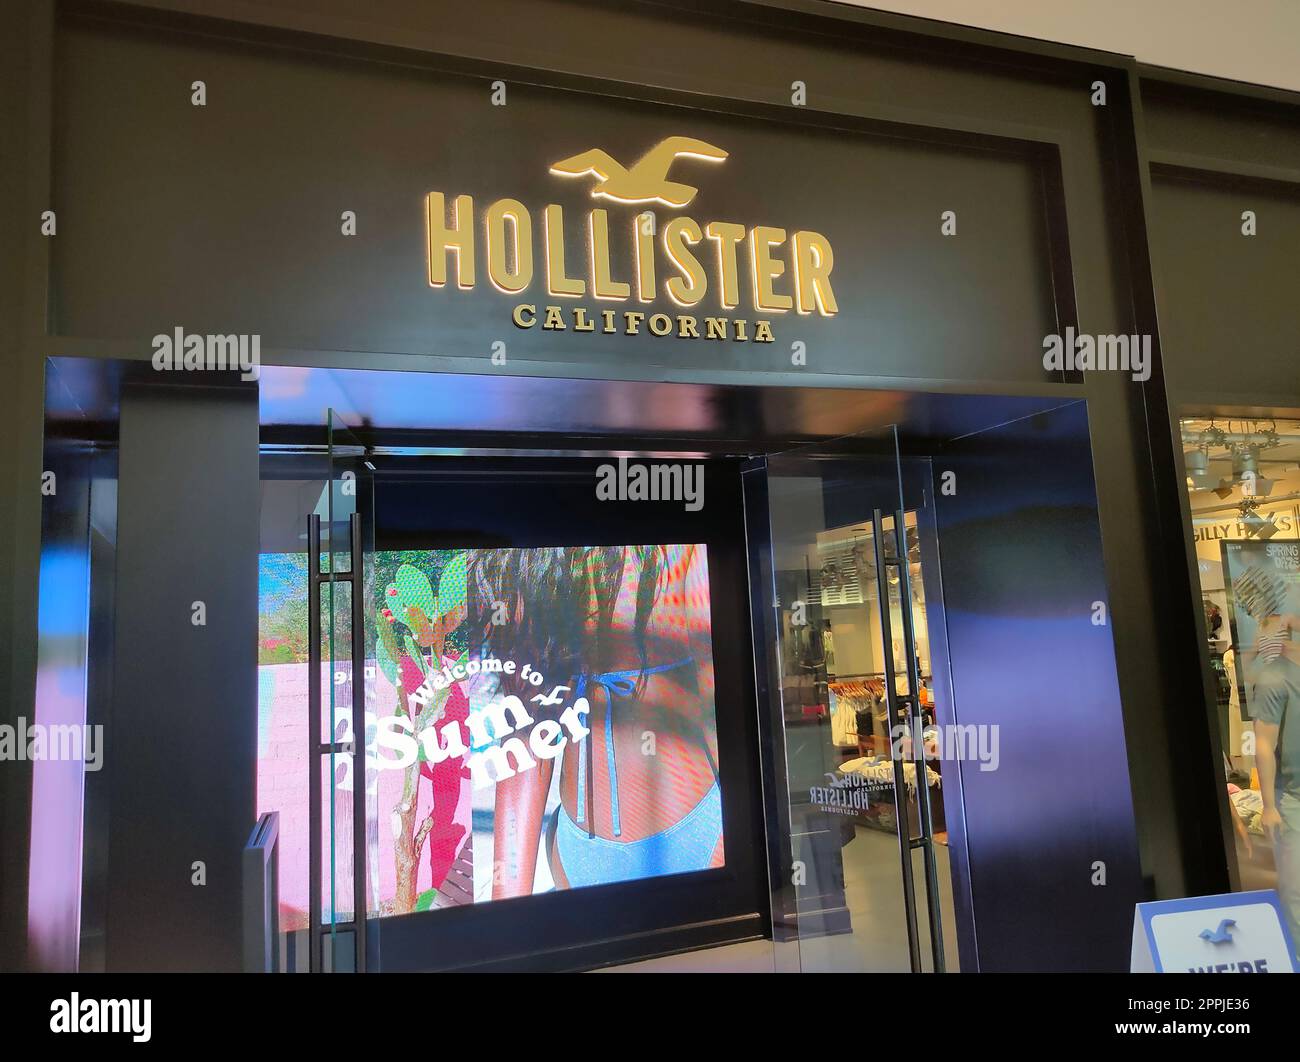 Aventura Mall Welcomes This Must-Visit Store